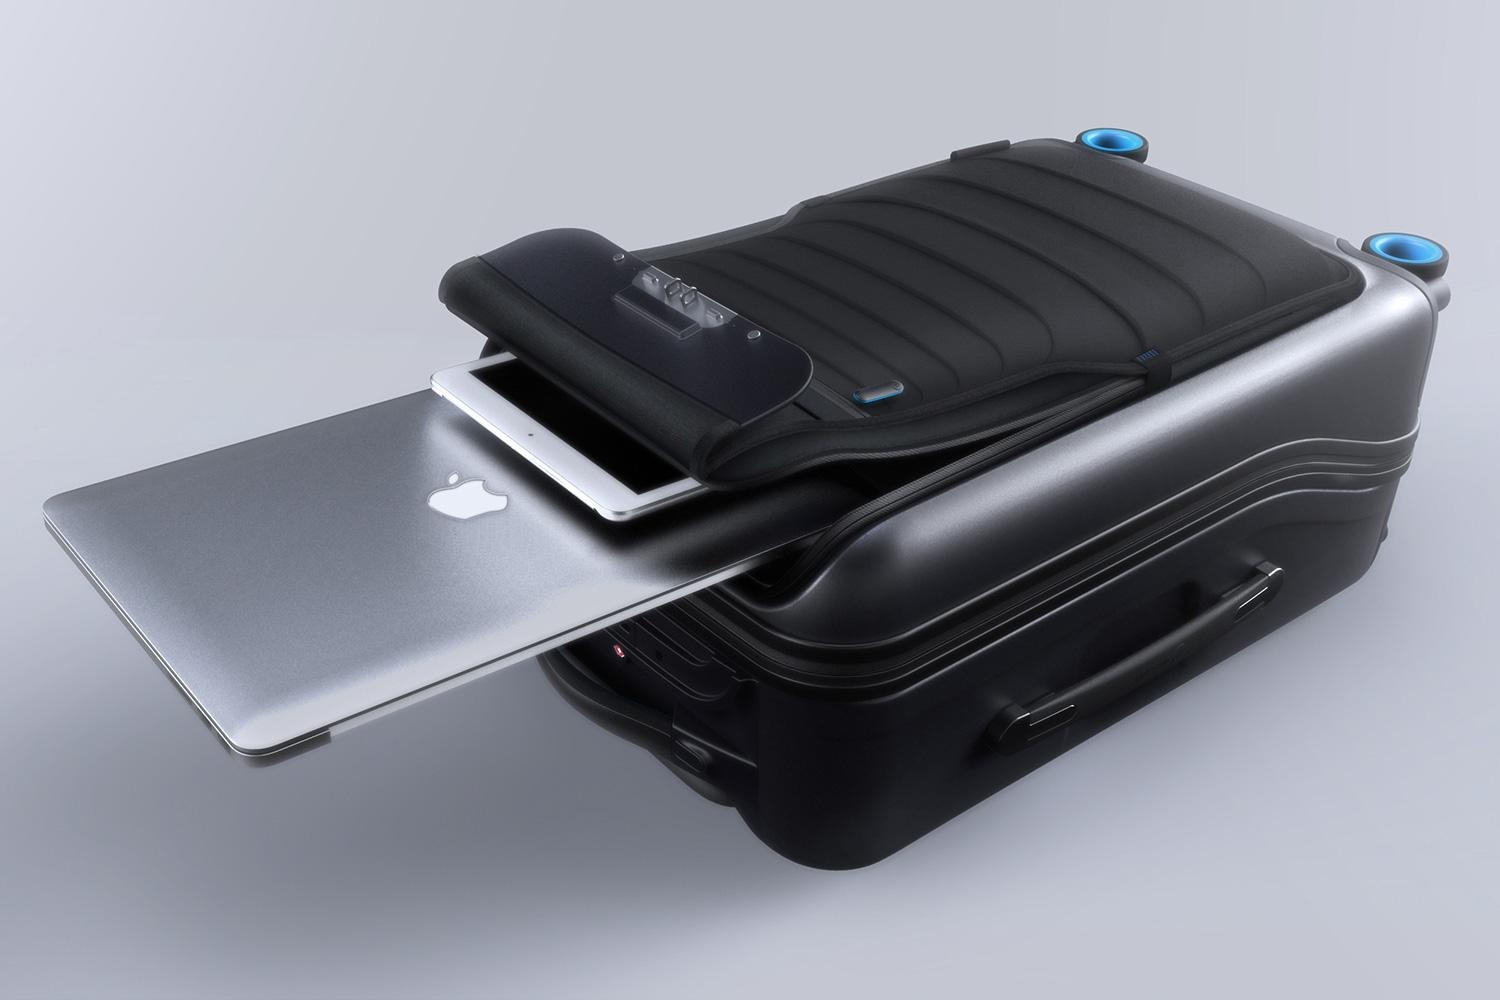 bluesmart-connected-suitcase-laptop-and-ipad-1500×1000